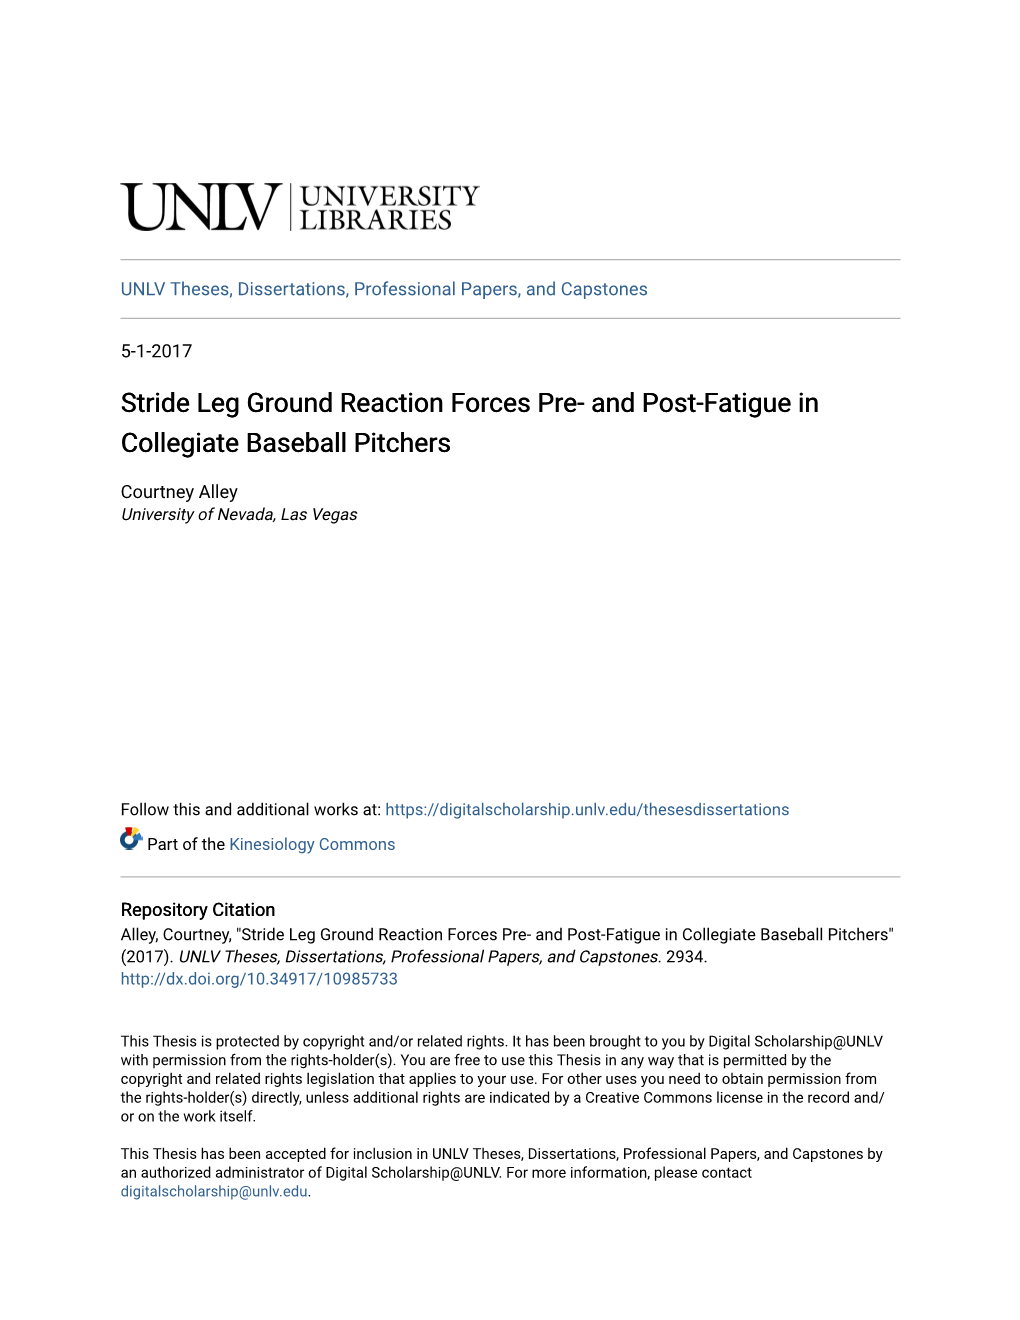 Stride Leg Ground Reaction Forces Pre- and Post-Fatigue in Collegiate Baseball Pitchers